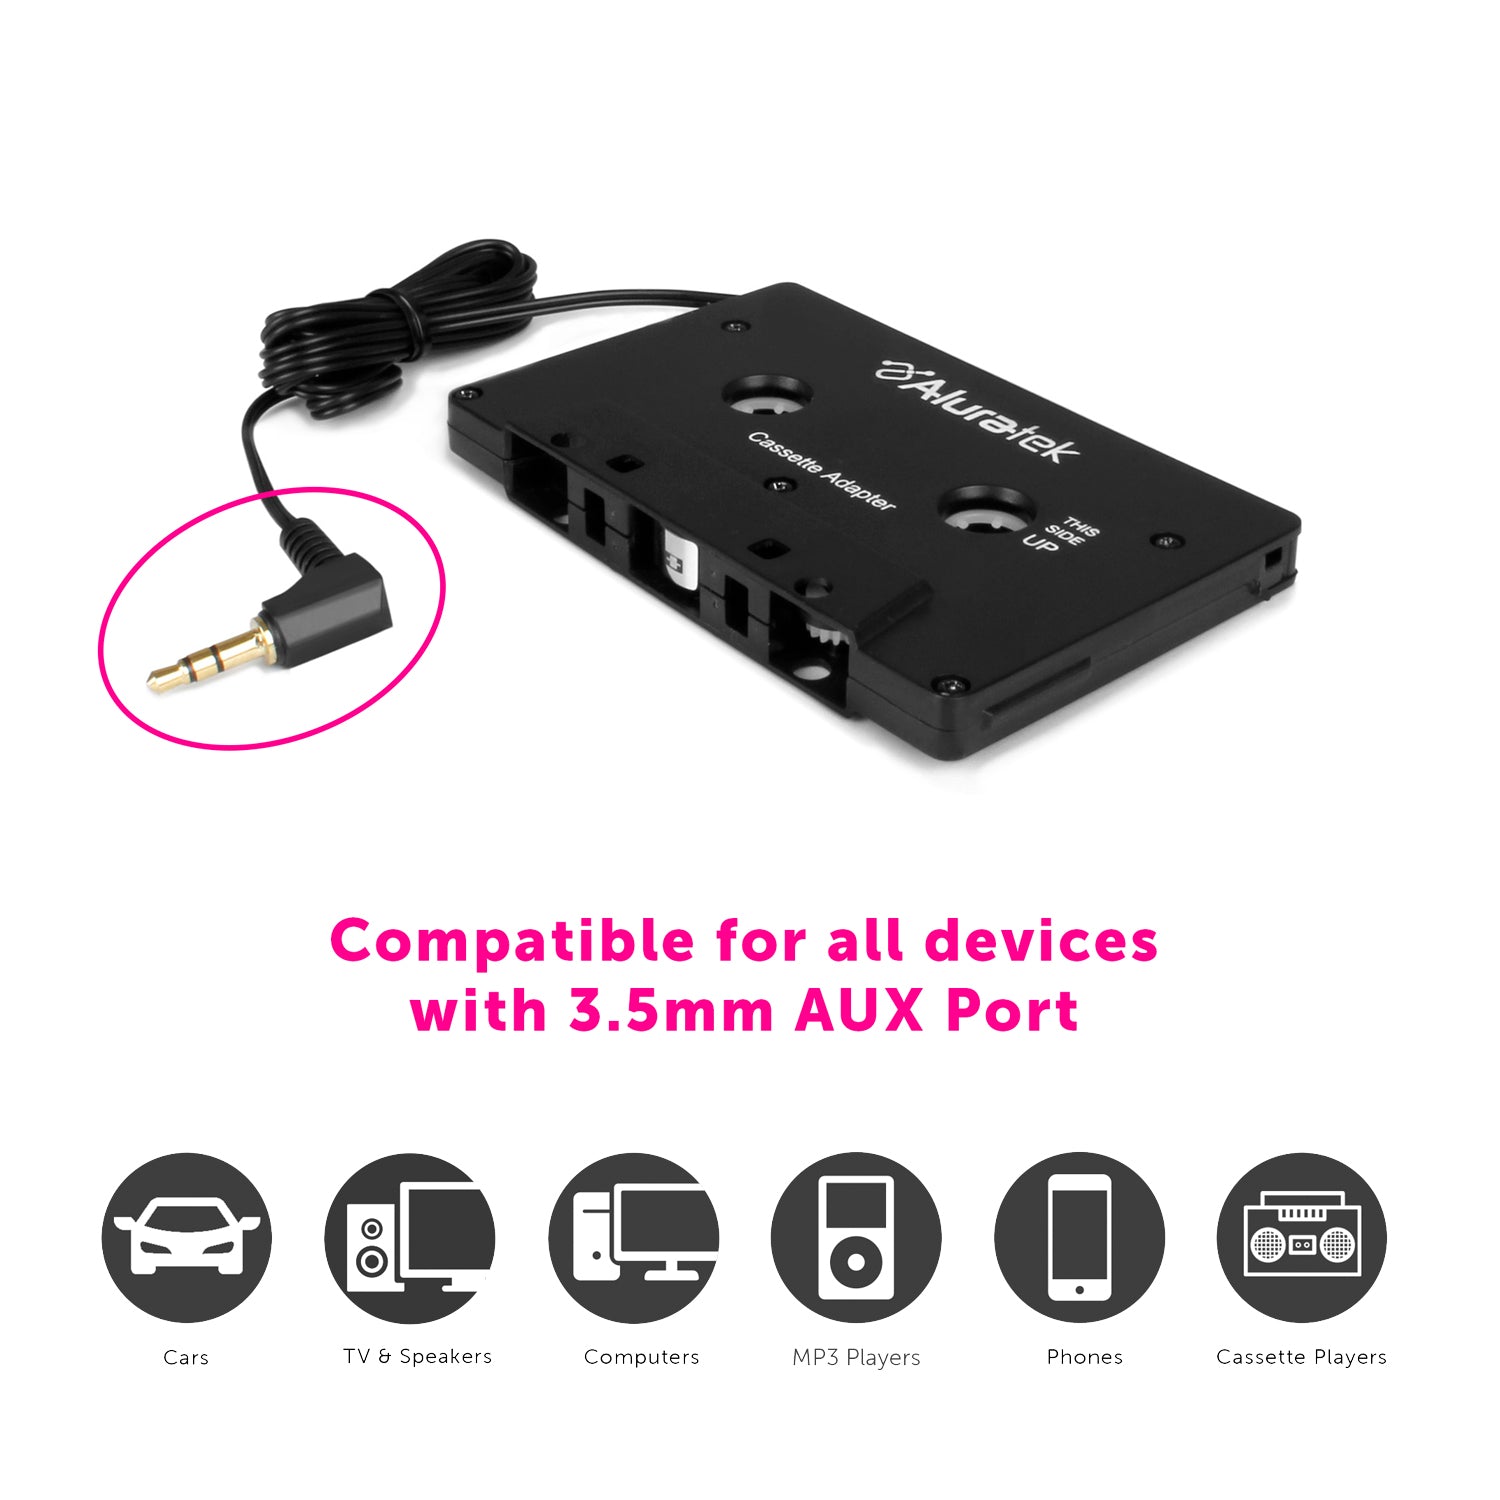  Aluratek Universal Bluetooth Audio Cassette Receiver, Built-in  Rechargeable Battery, Up to 8 Hours Playtime, Audio Receiving up to 33  Feet, ABCT01F : Electronics